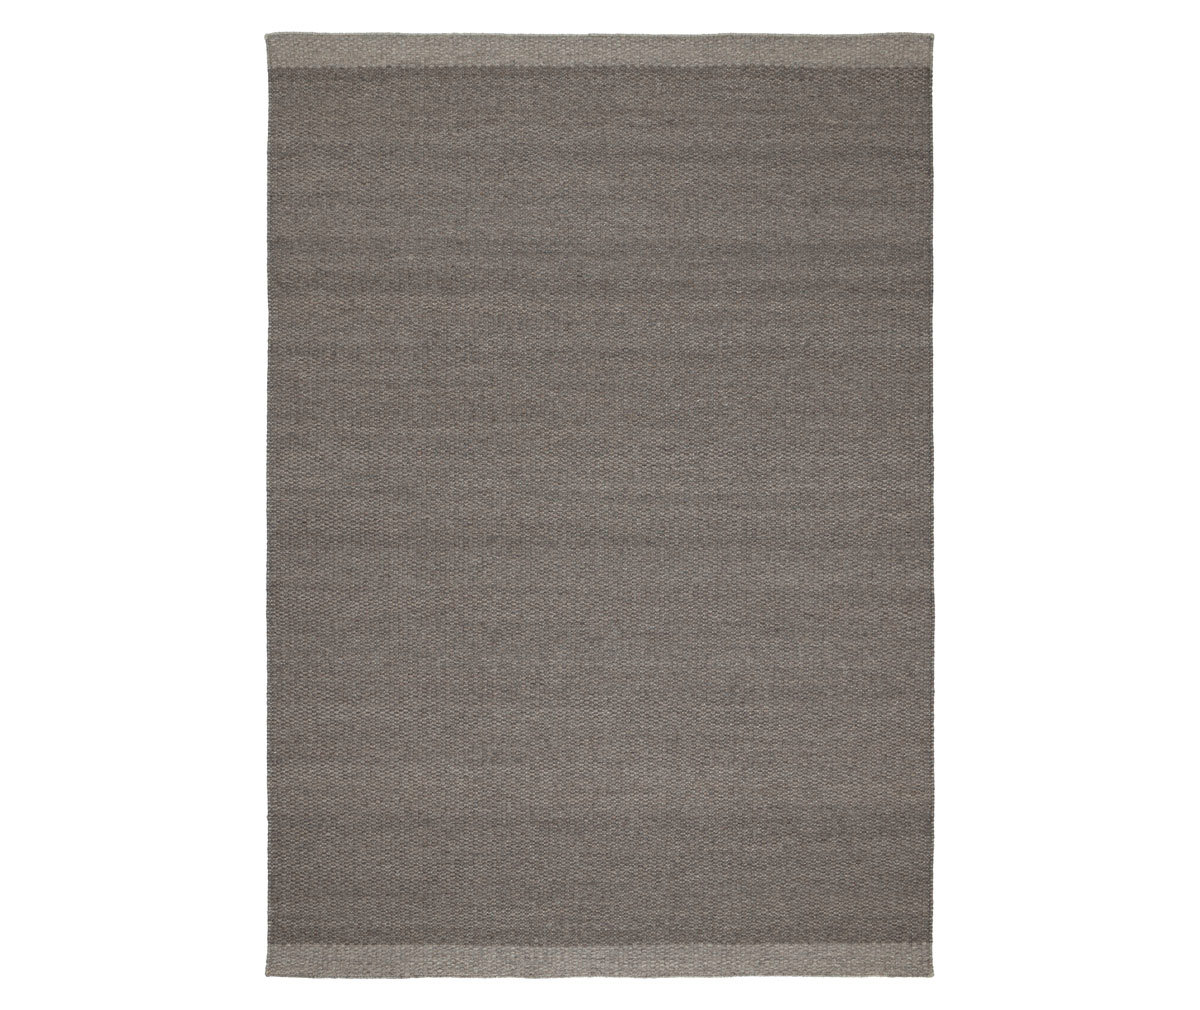 Linie Design Frode Rug Charcoal, 250 x 350 cm